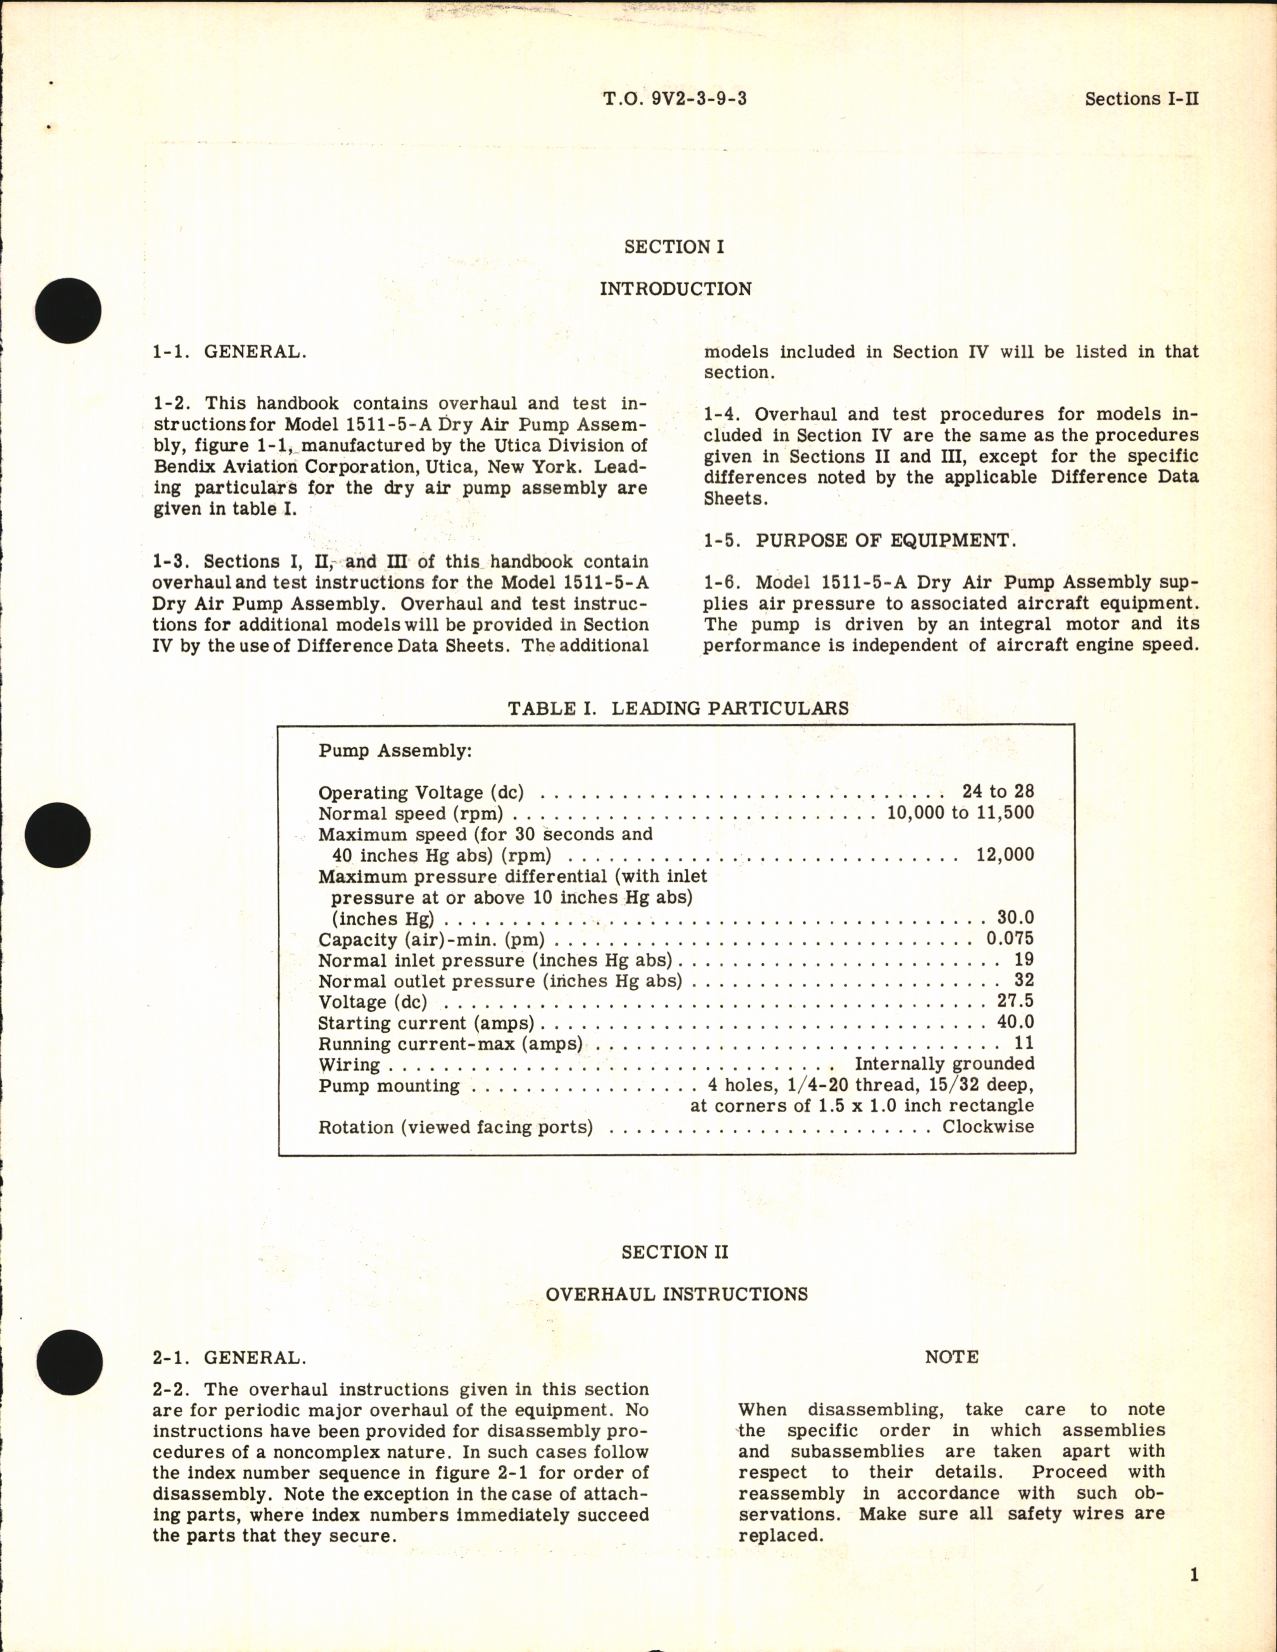 Sample page 5 from AirCorps Library document: Handbook of Overhaul Instructions for Dry Air Pump Model No. 1511-5-A